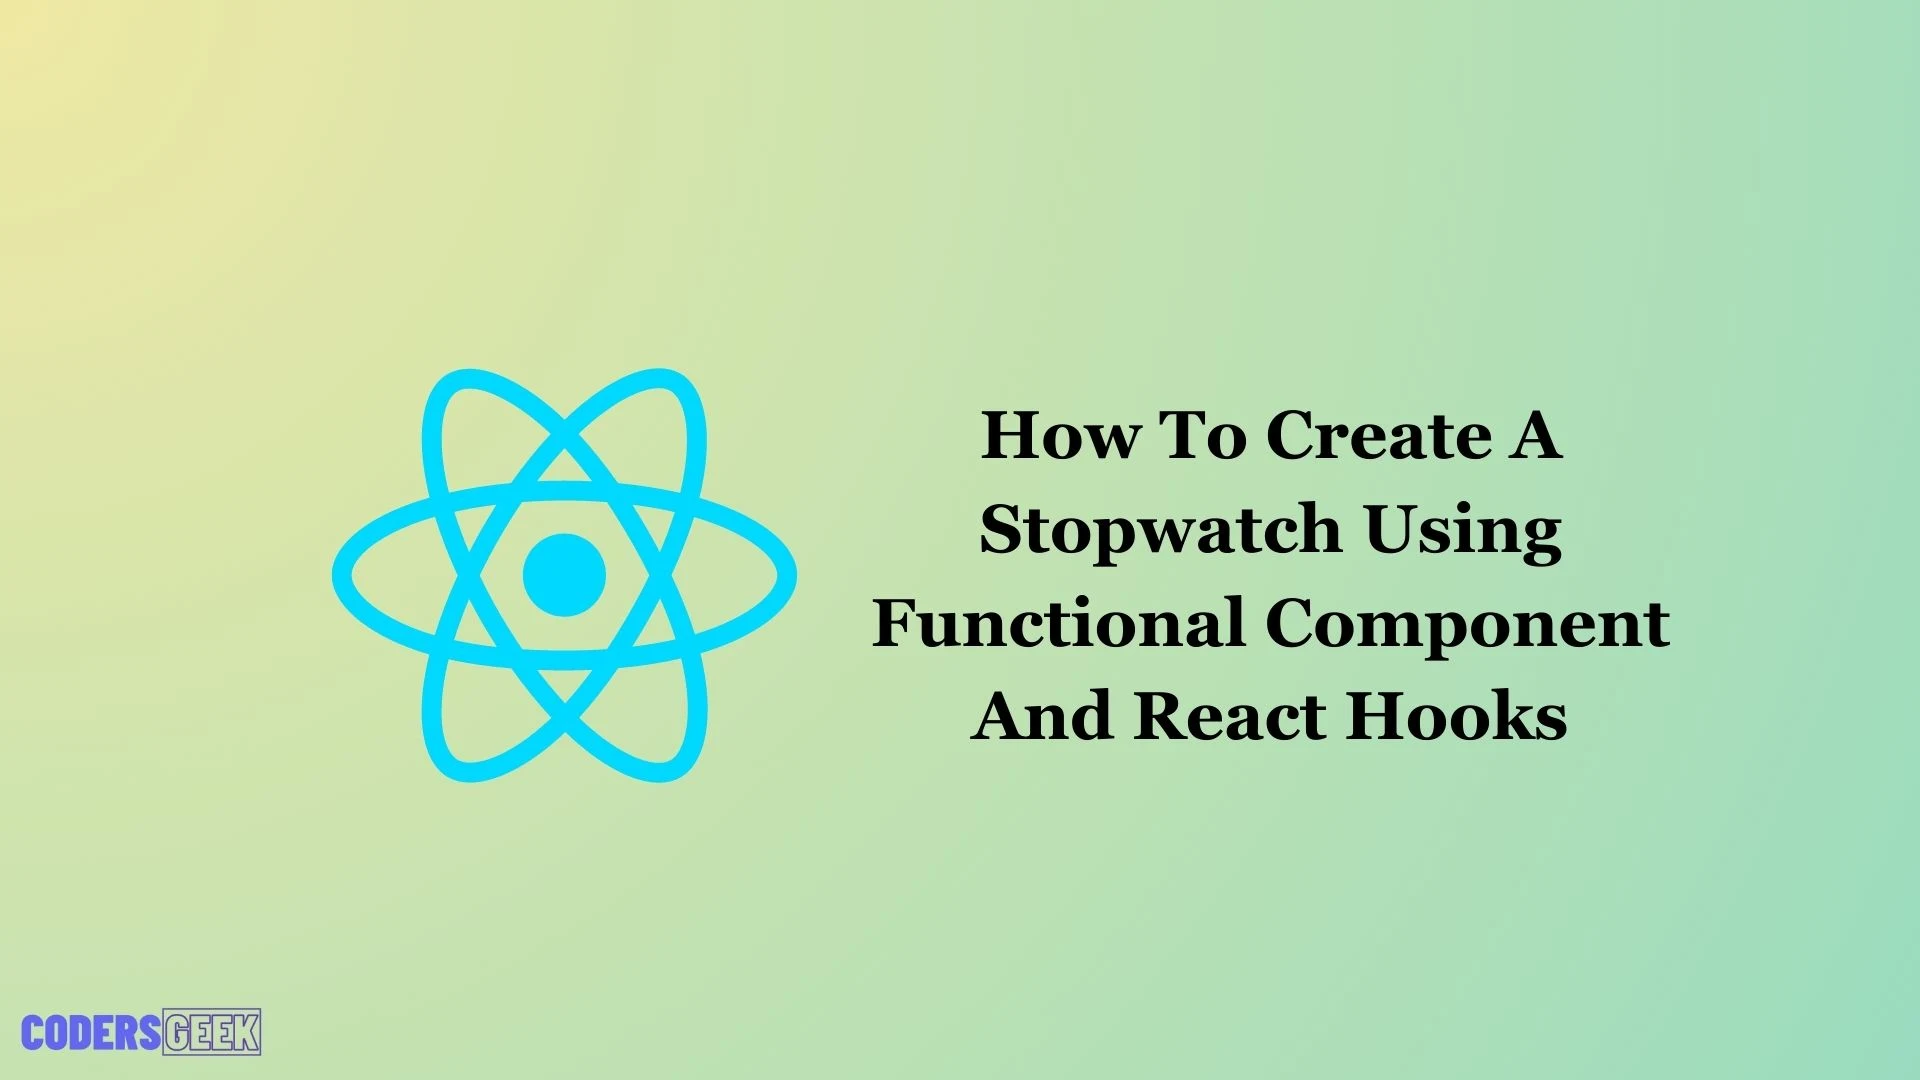 How To Create A Stopwatch Using Functional Component And React Hooks